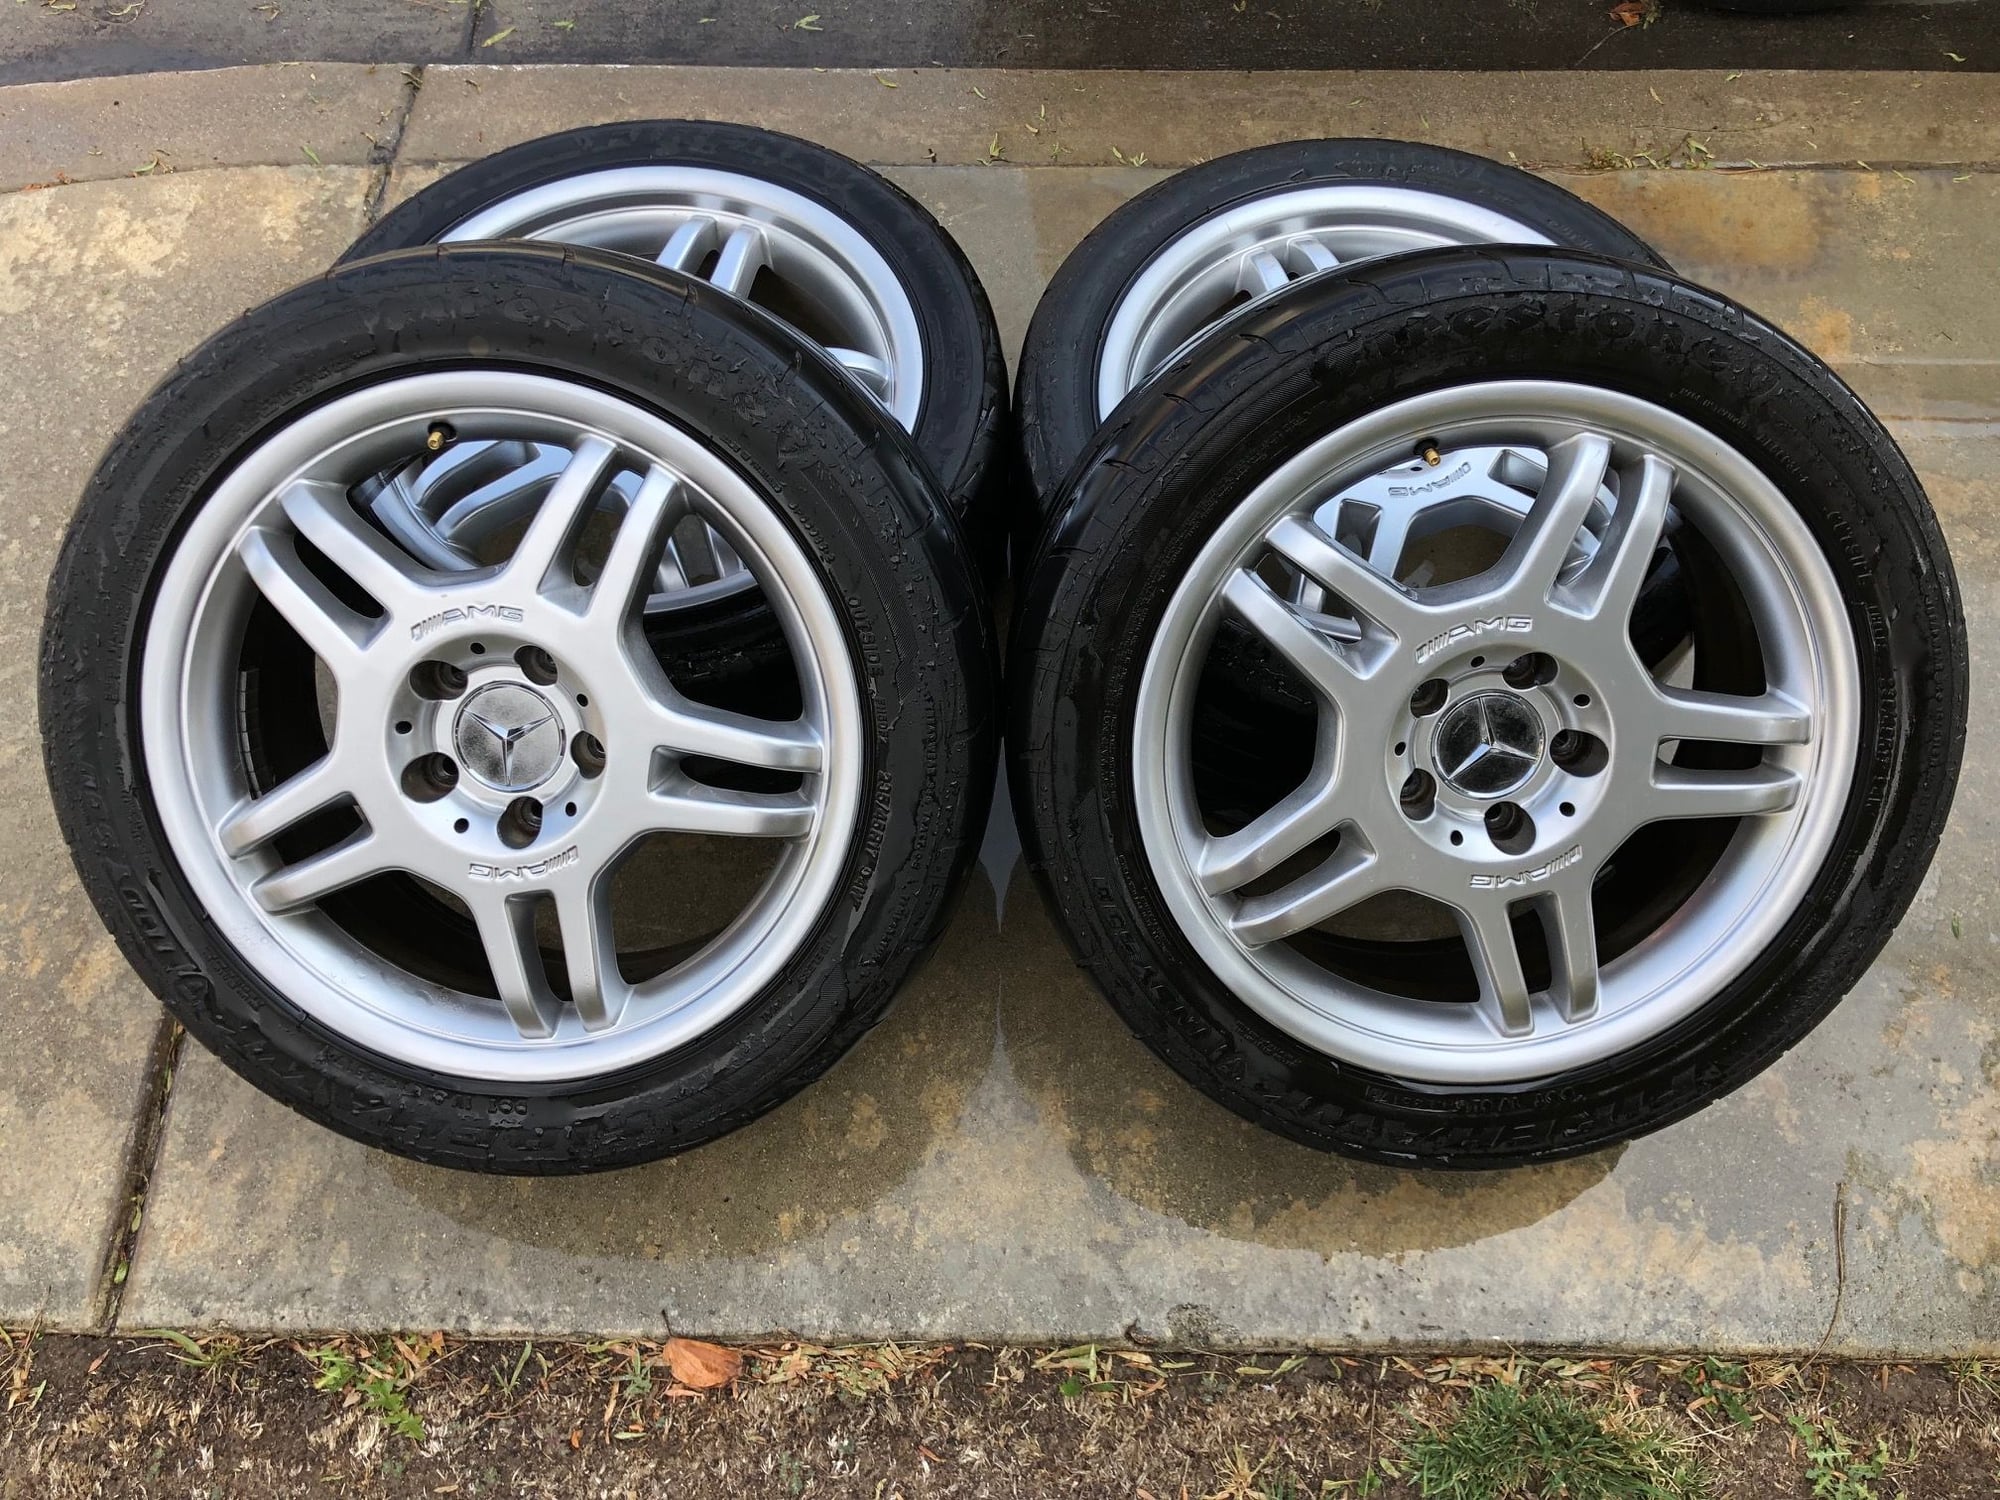 Wheels and Tires/Axles - OEM AMG C32 Straggered 17" Wheels - Used - 2001 to 2004 Mercedes-Benz C32 AMG - Fontana, CA 92336, United States